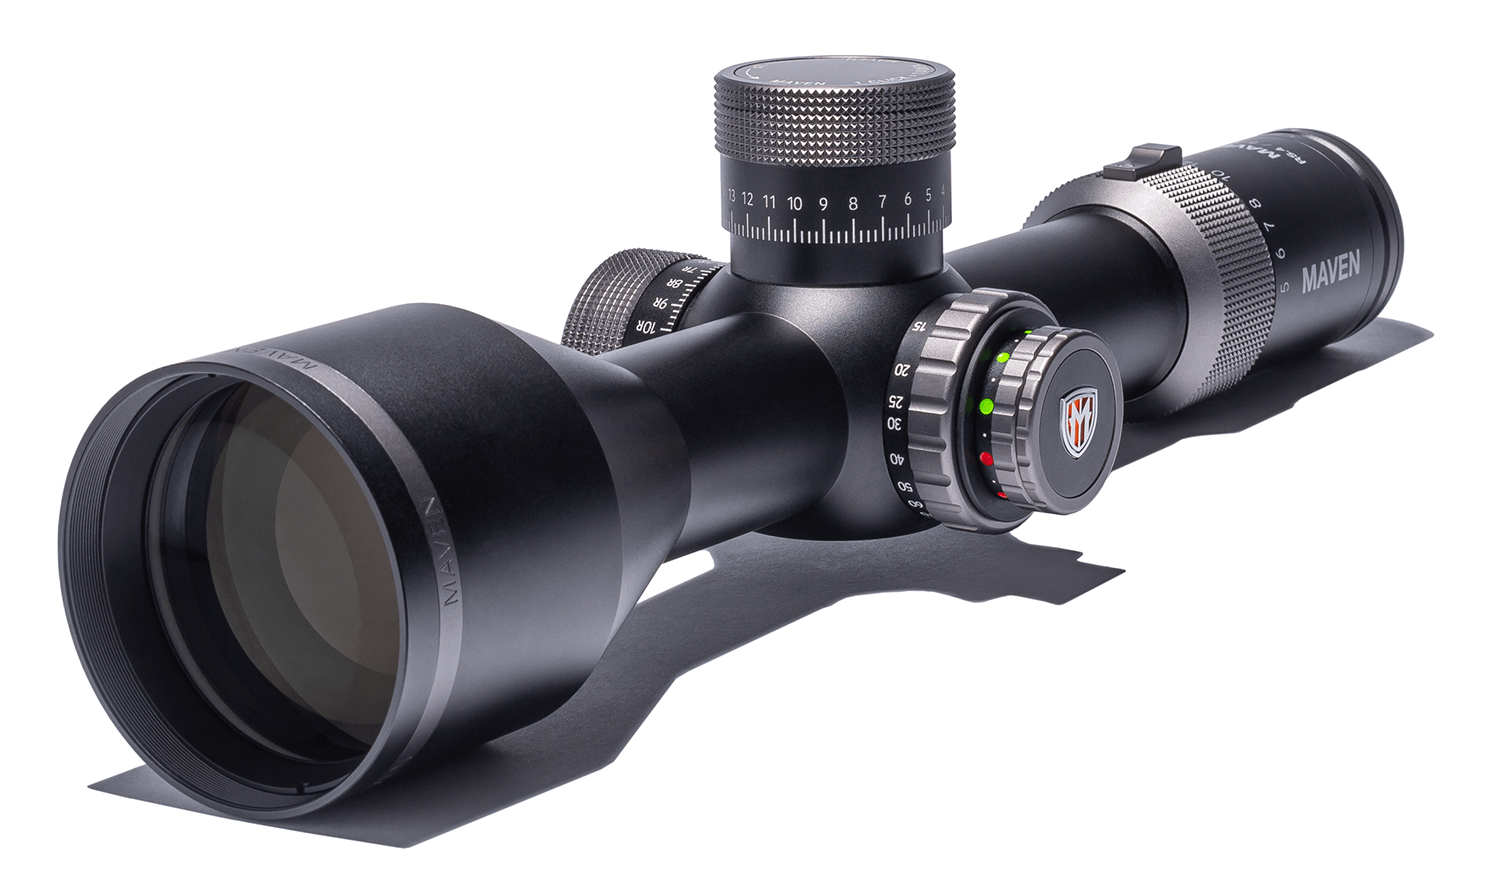 Maven RS.4 5-30x56 riflescope on a white background.